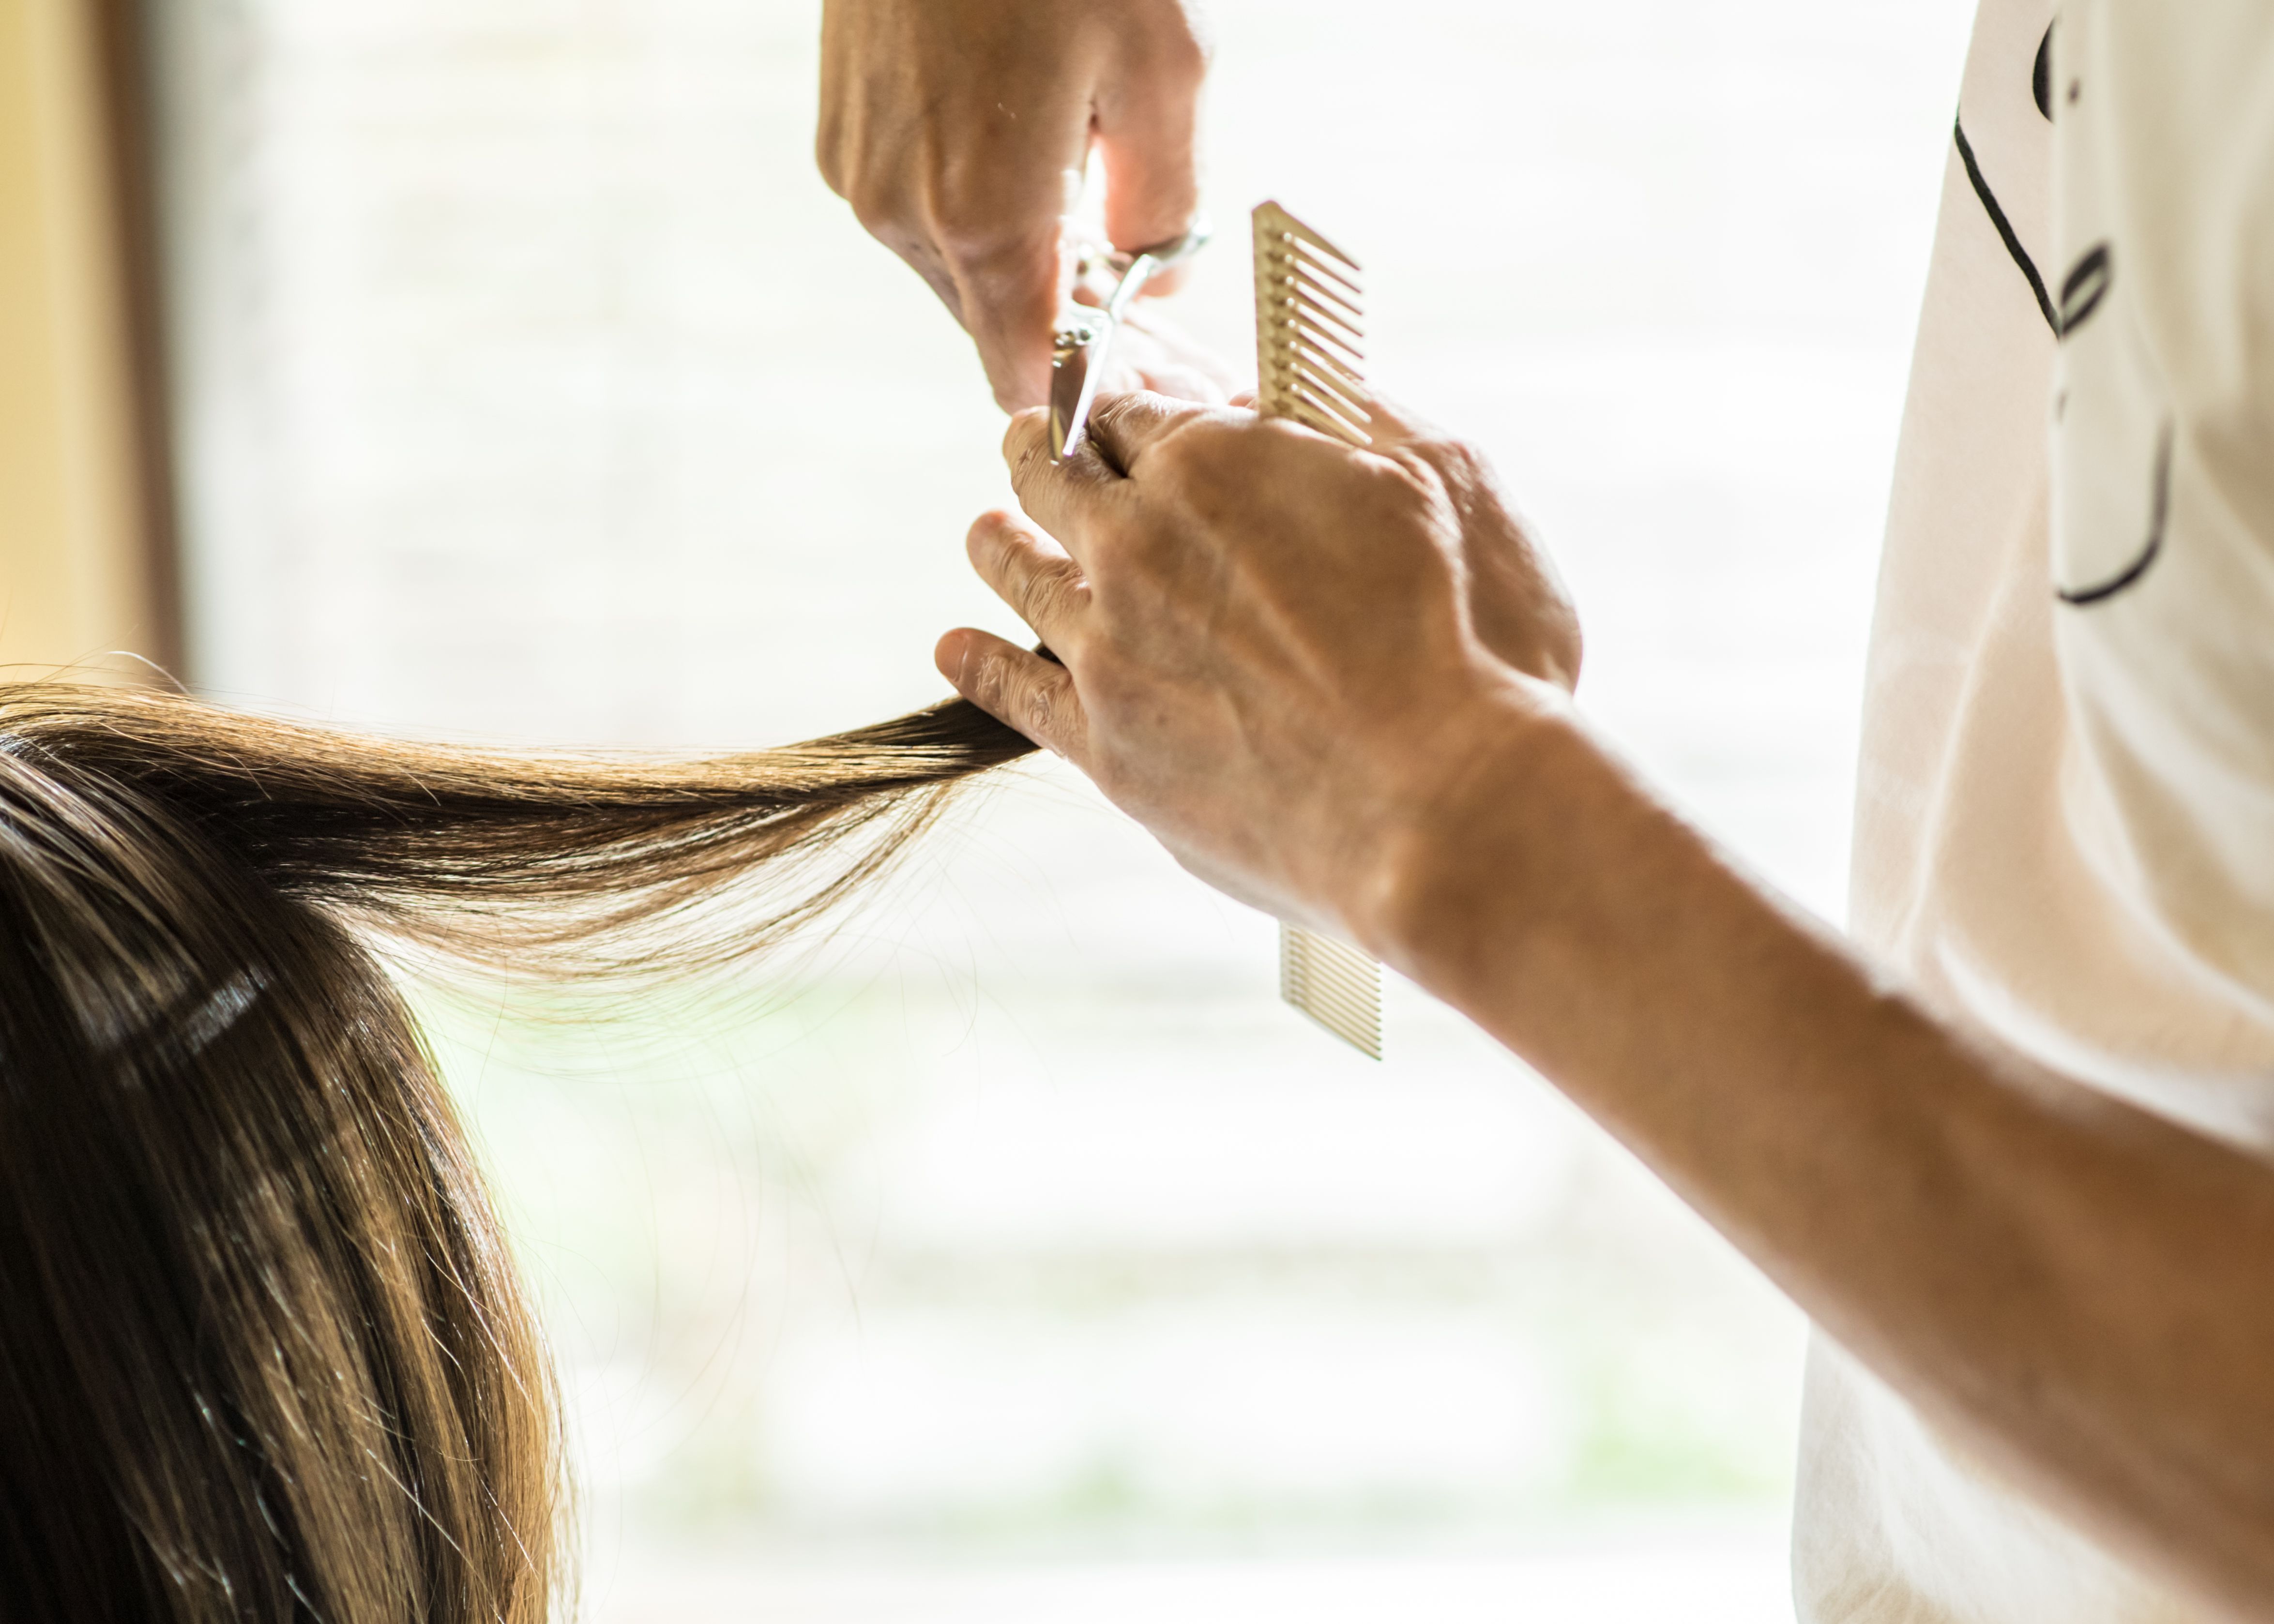 Does cutting your hair make it grow faster?